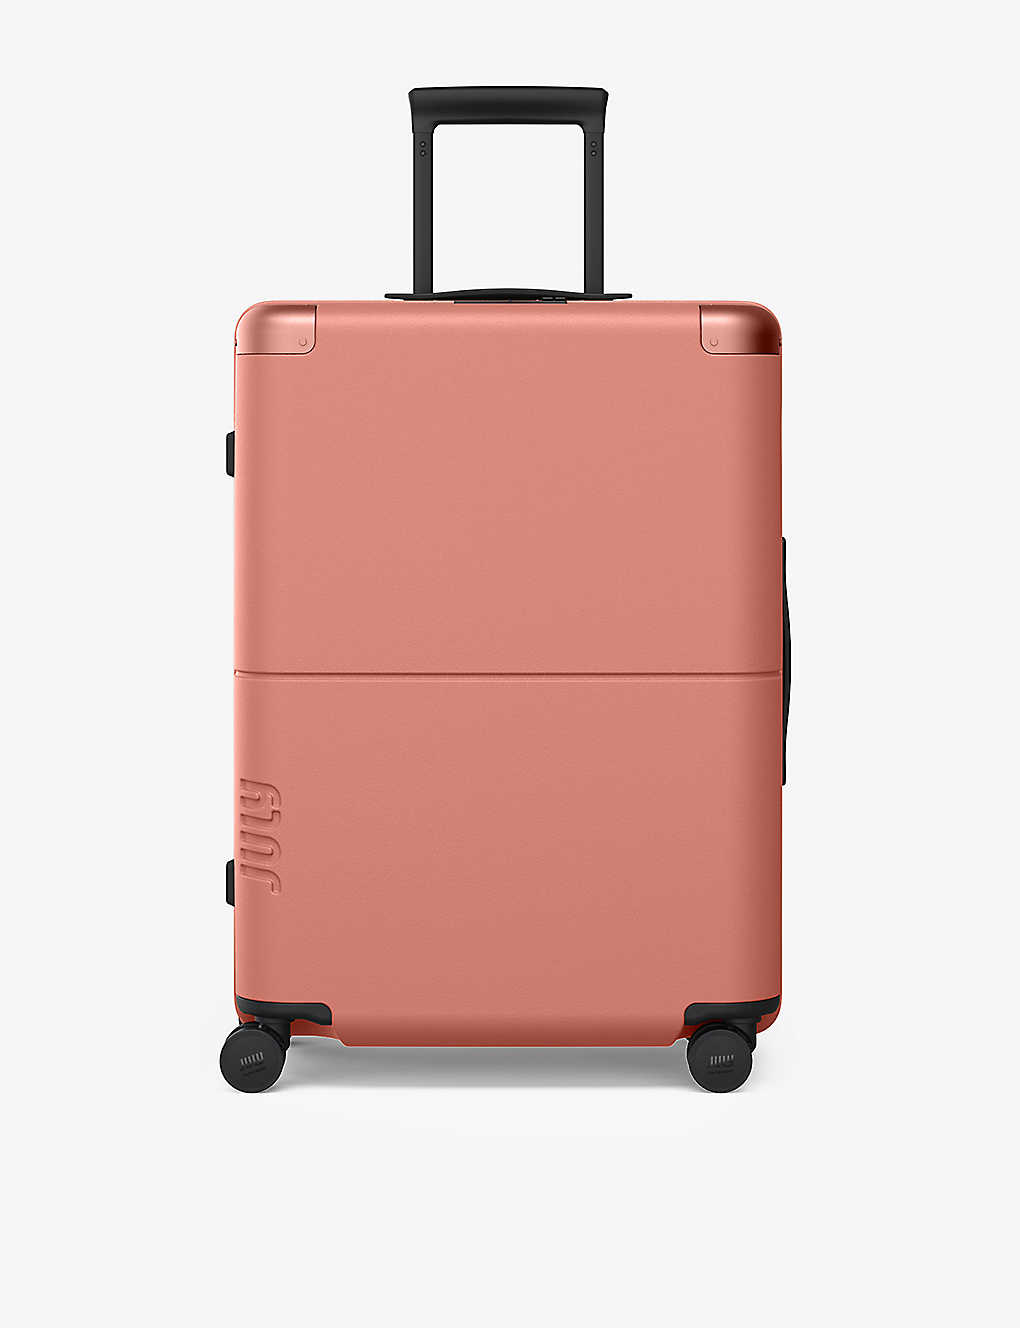 July Clay Checked Luggage Polycarbonate Suitcase 66cm